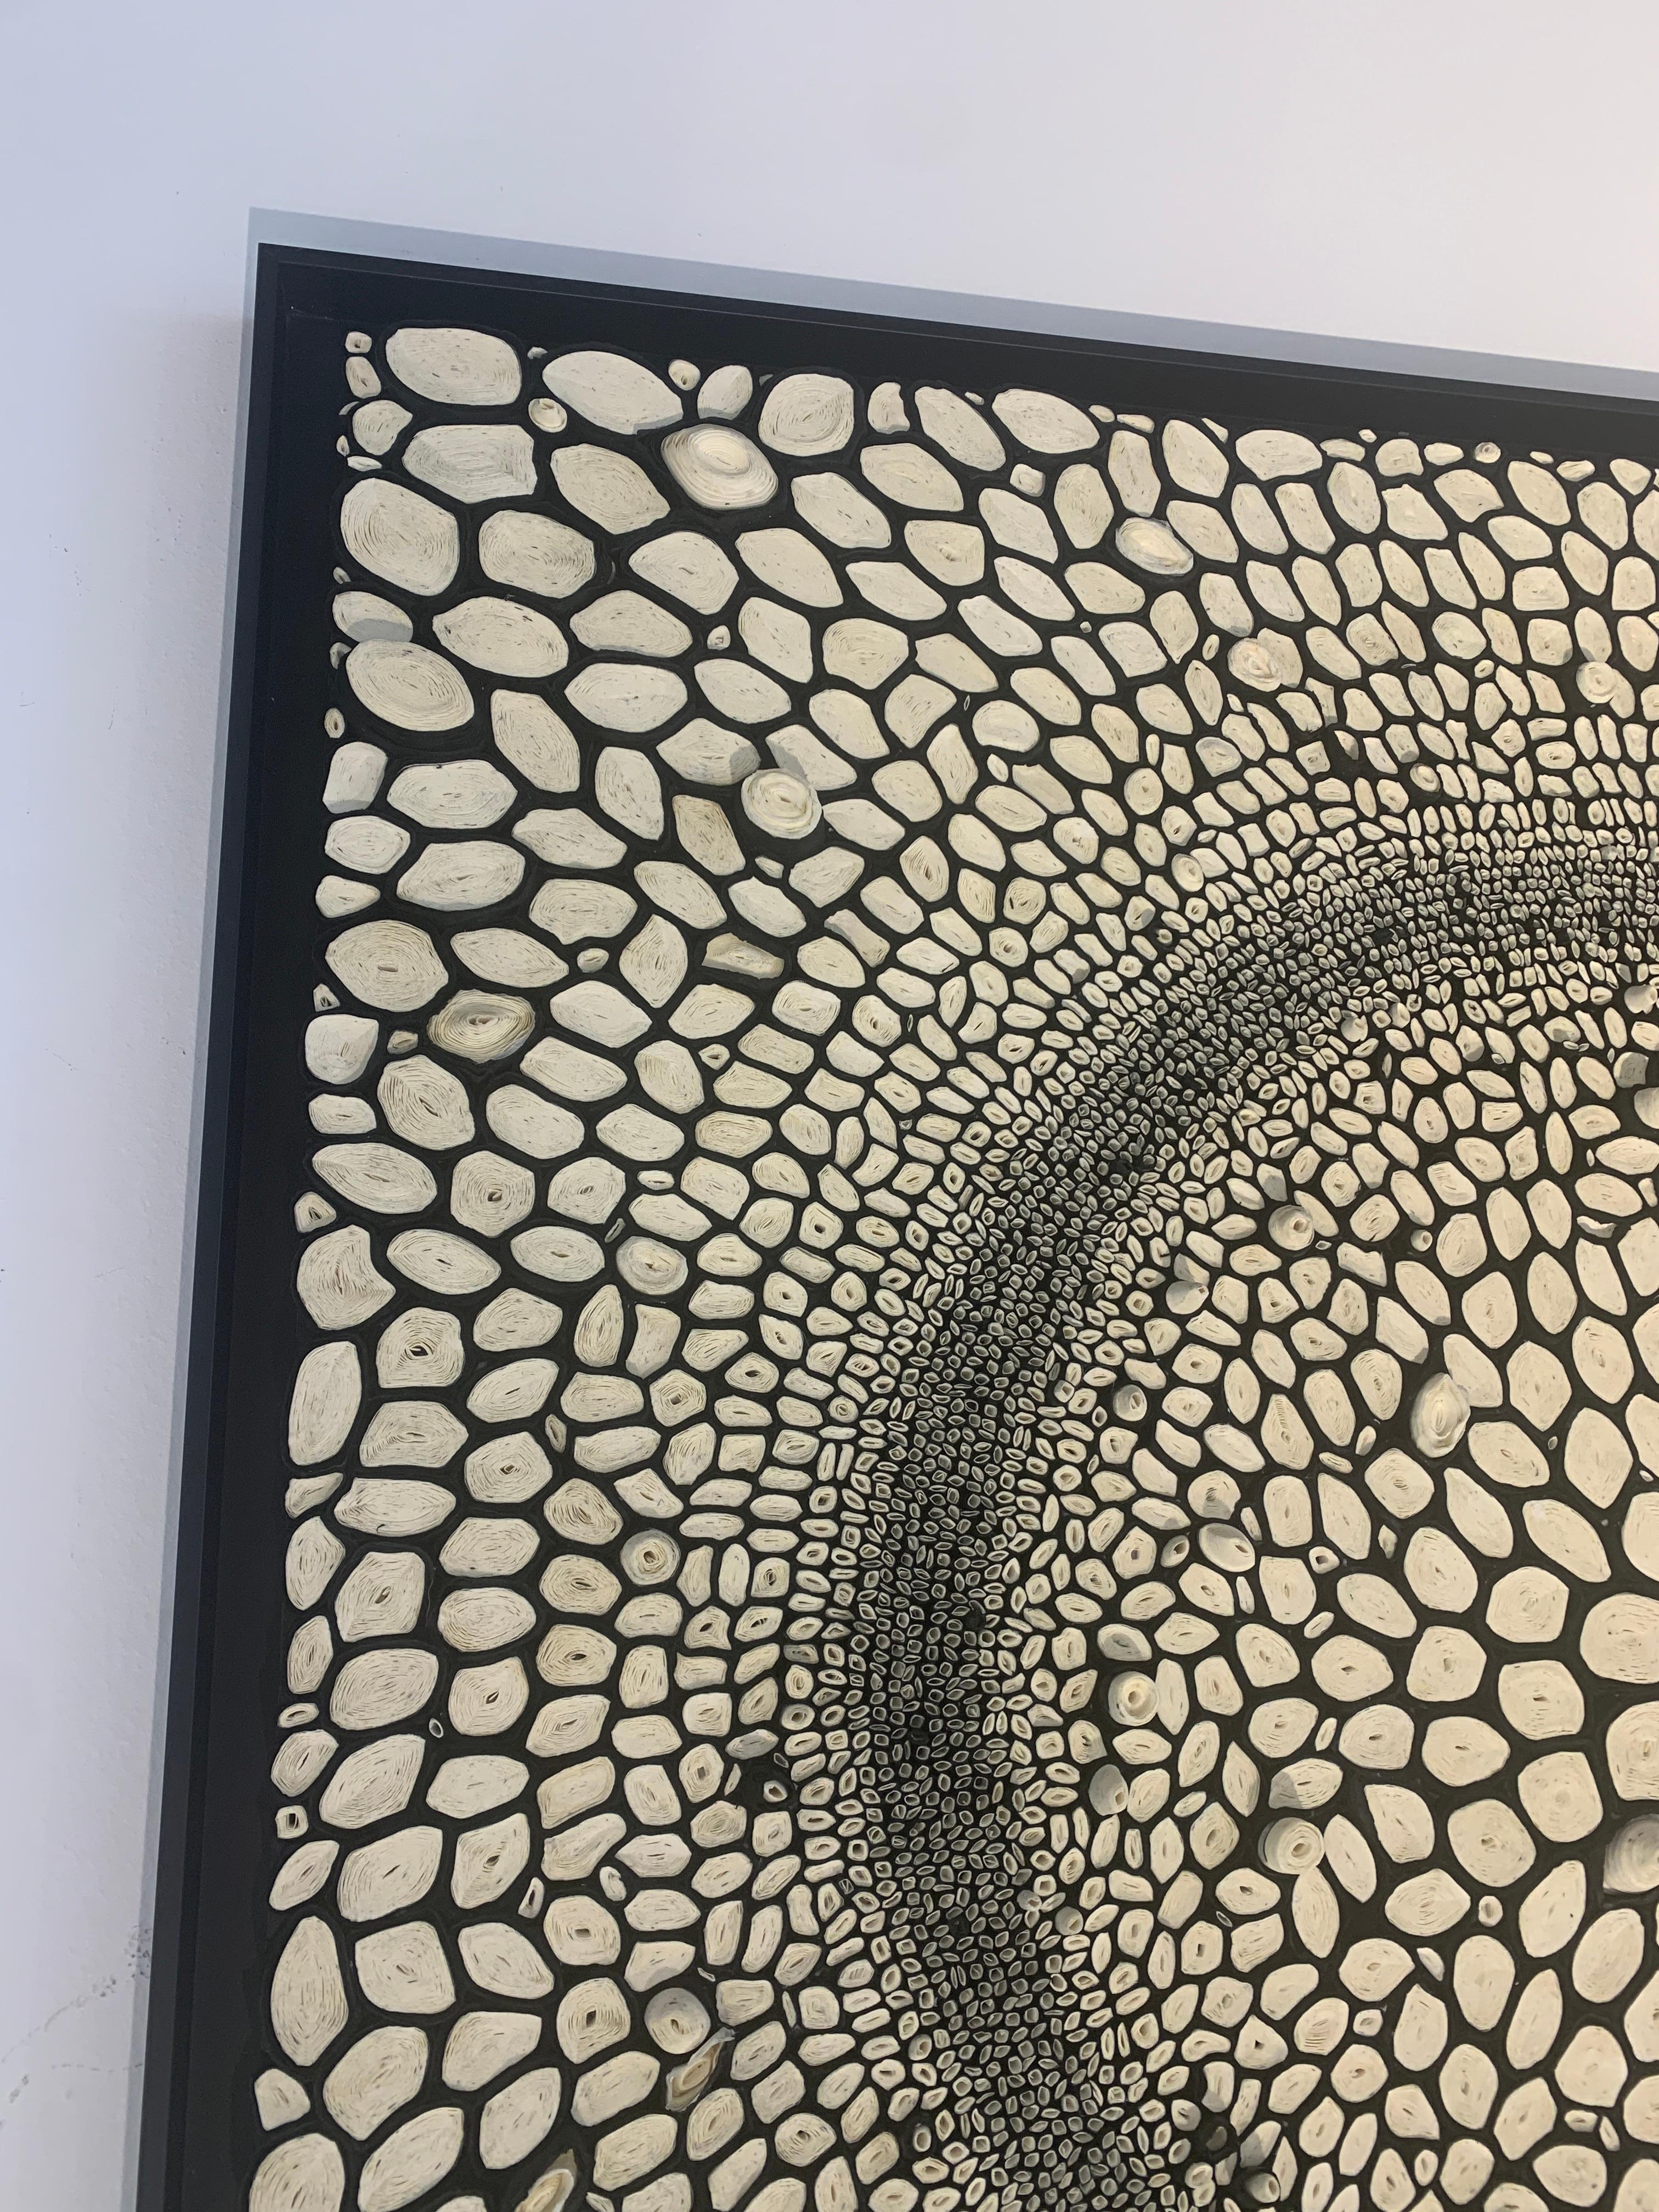 This black and white dimensional paper pieces is by mixed media artist, Amy Genser. This textural, one-of-a-kind framed wall works embody movement and processes. She masterfully manipulates paper -- each piece being cut, rolled and stacked -- to